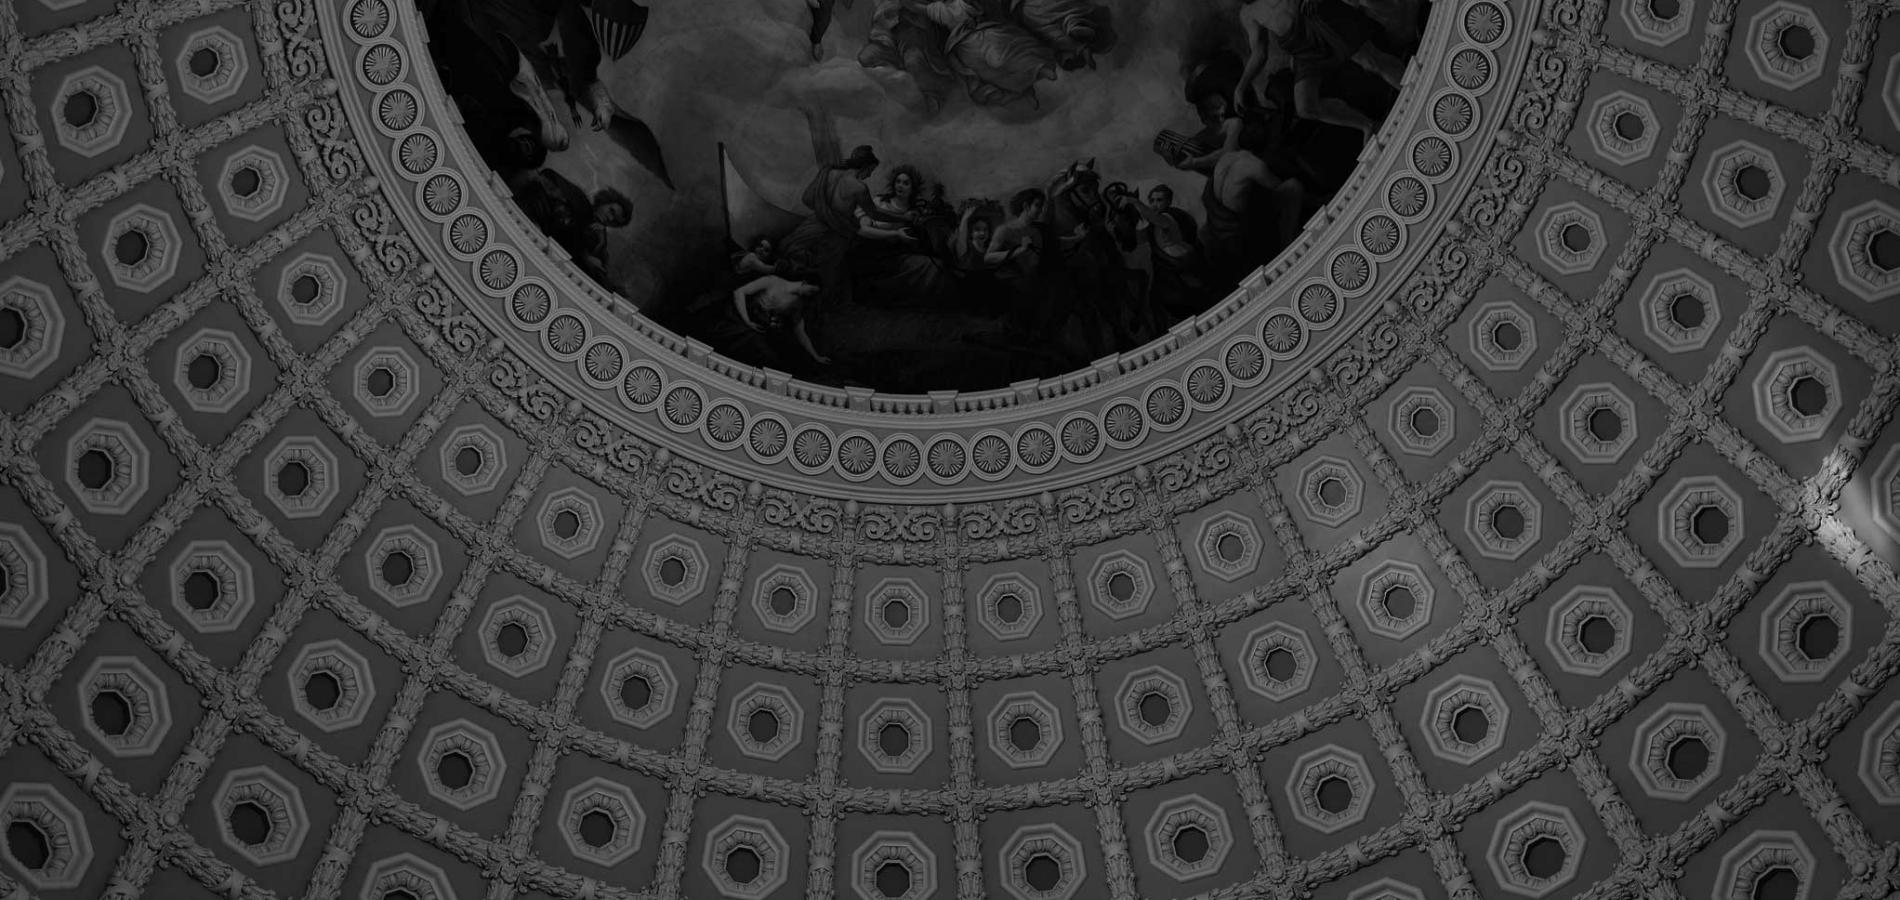 Capitol dome view from inside